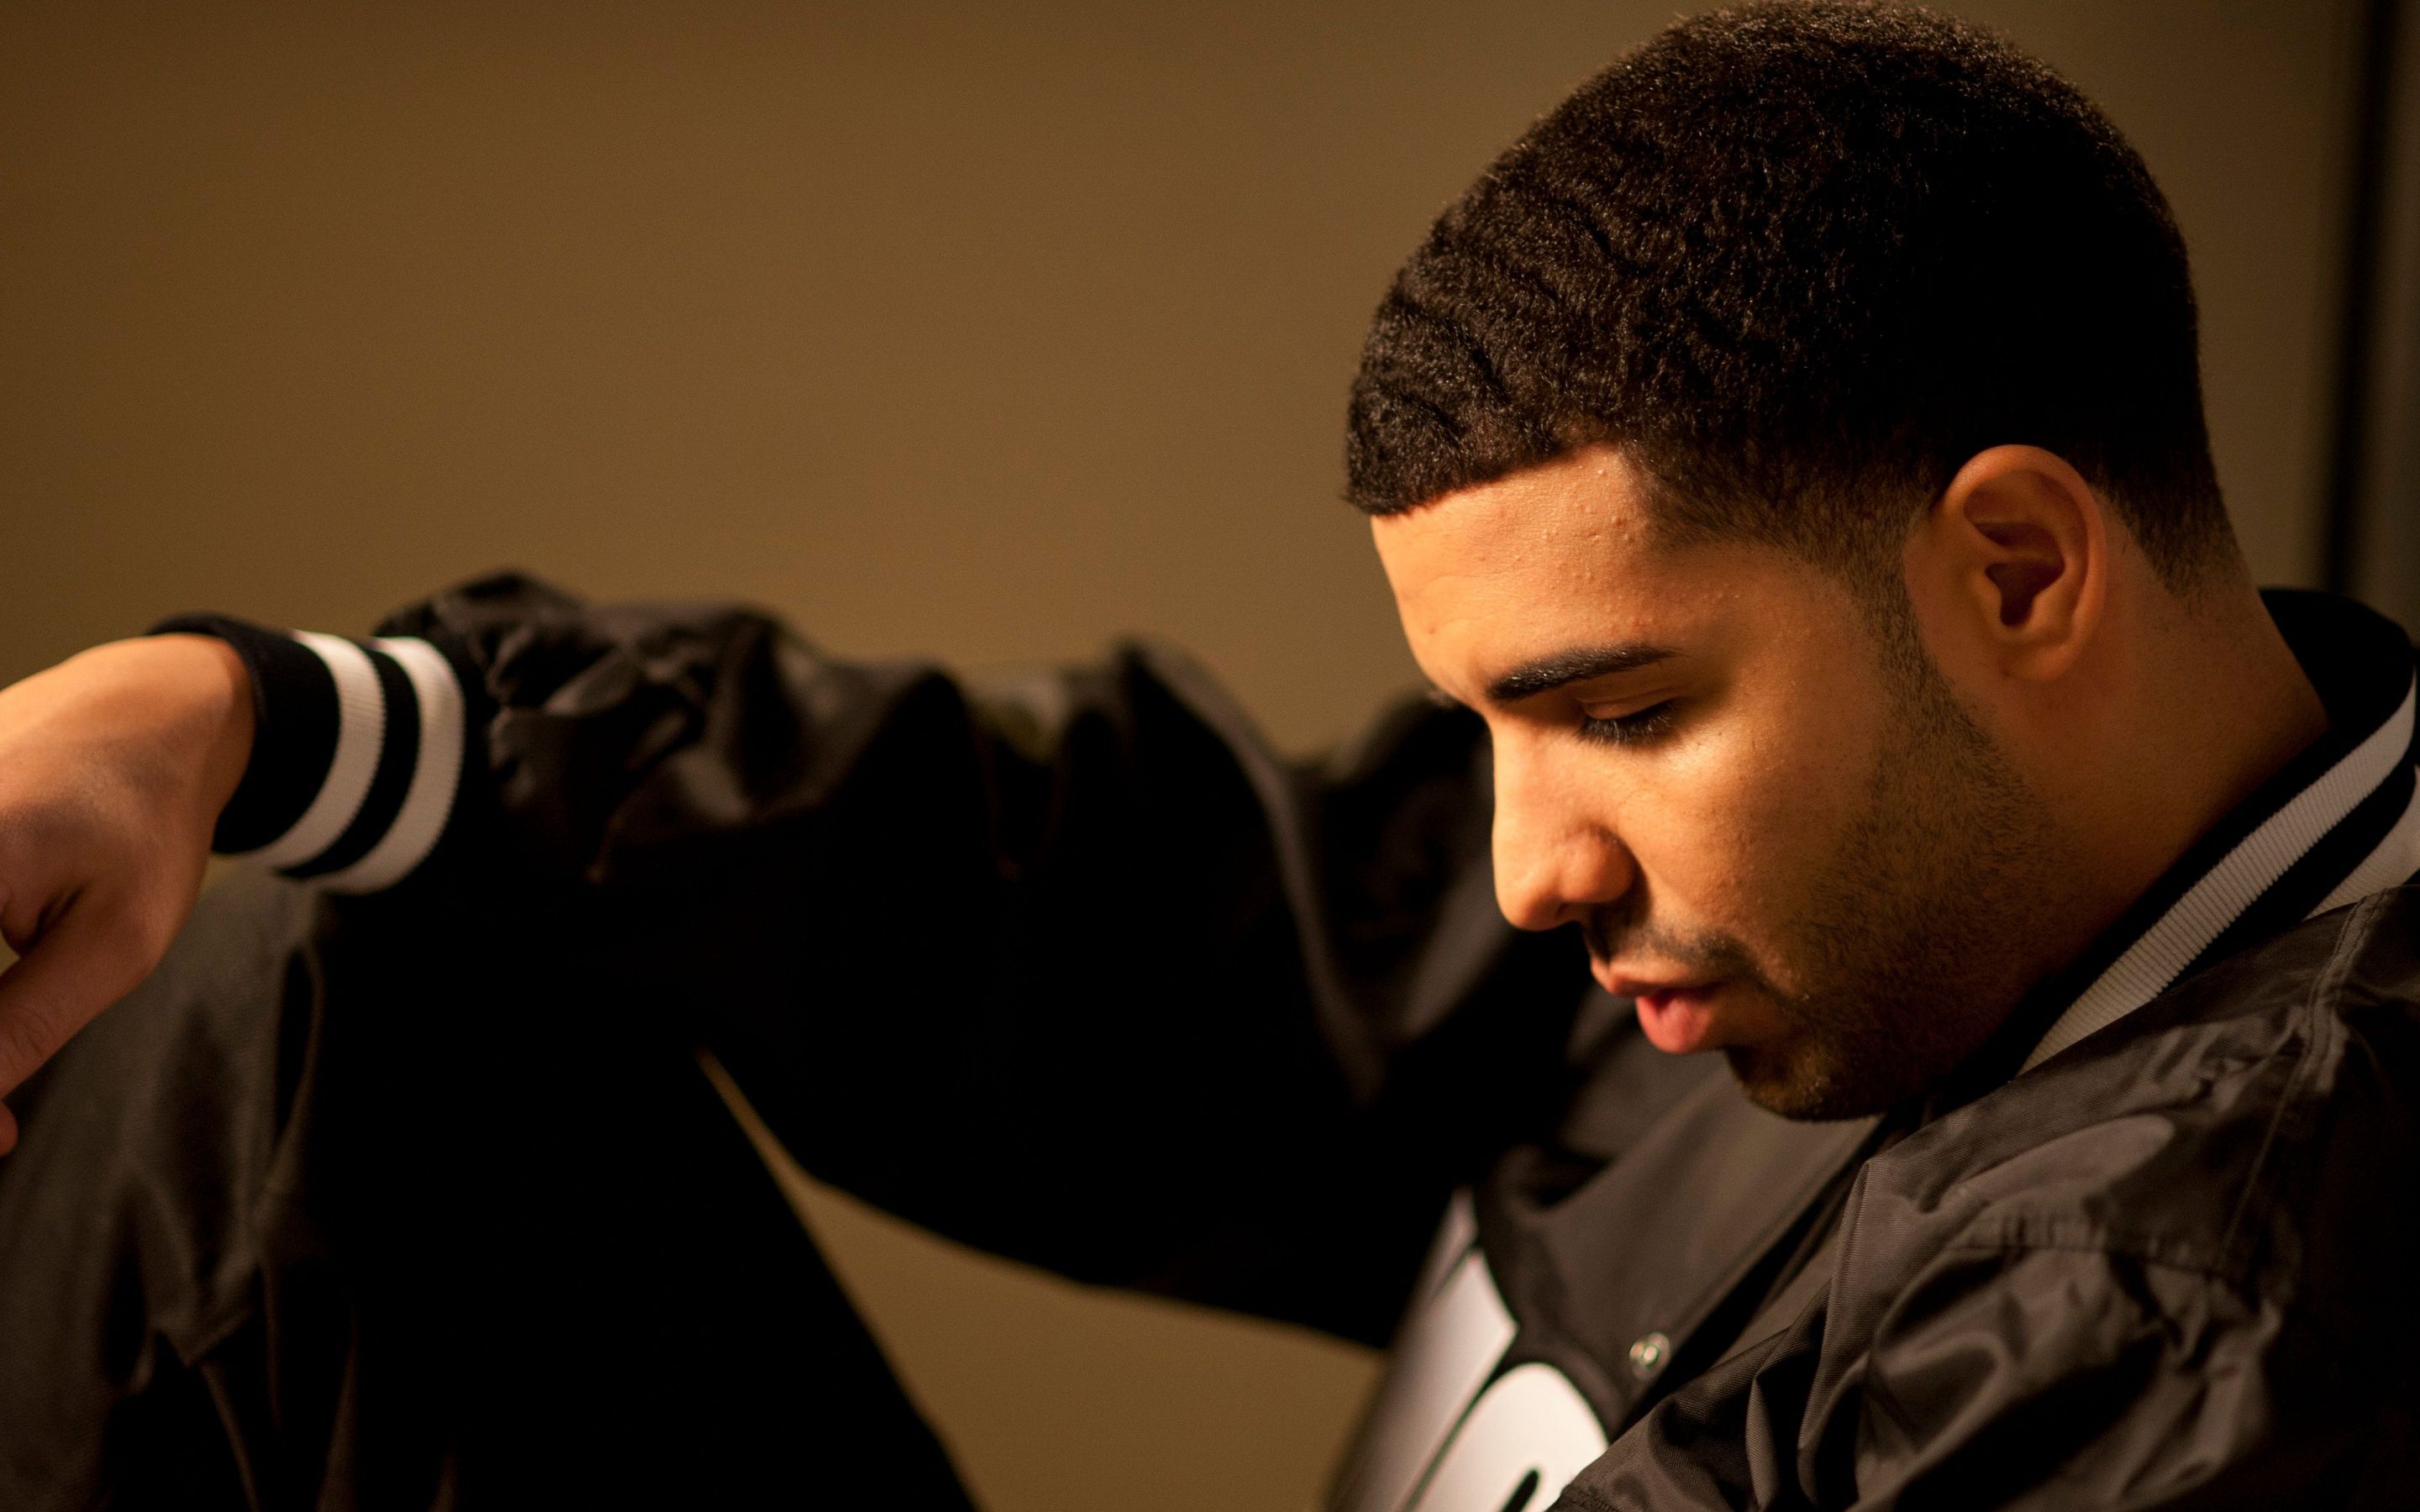 Drake in a black jacket with white stripes on the sleeves. - Drake